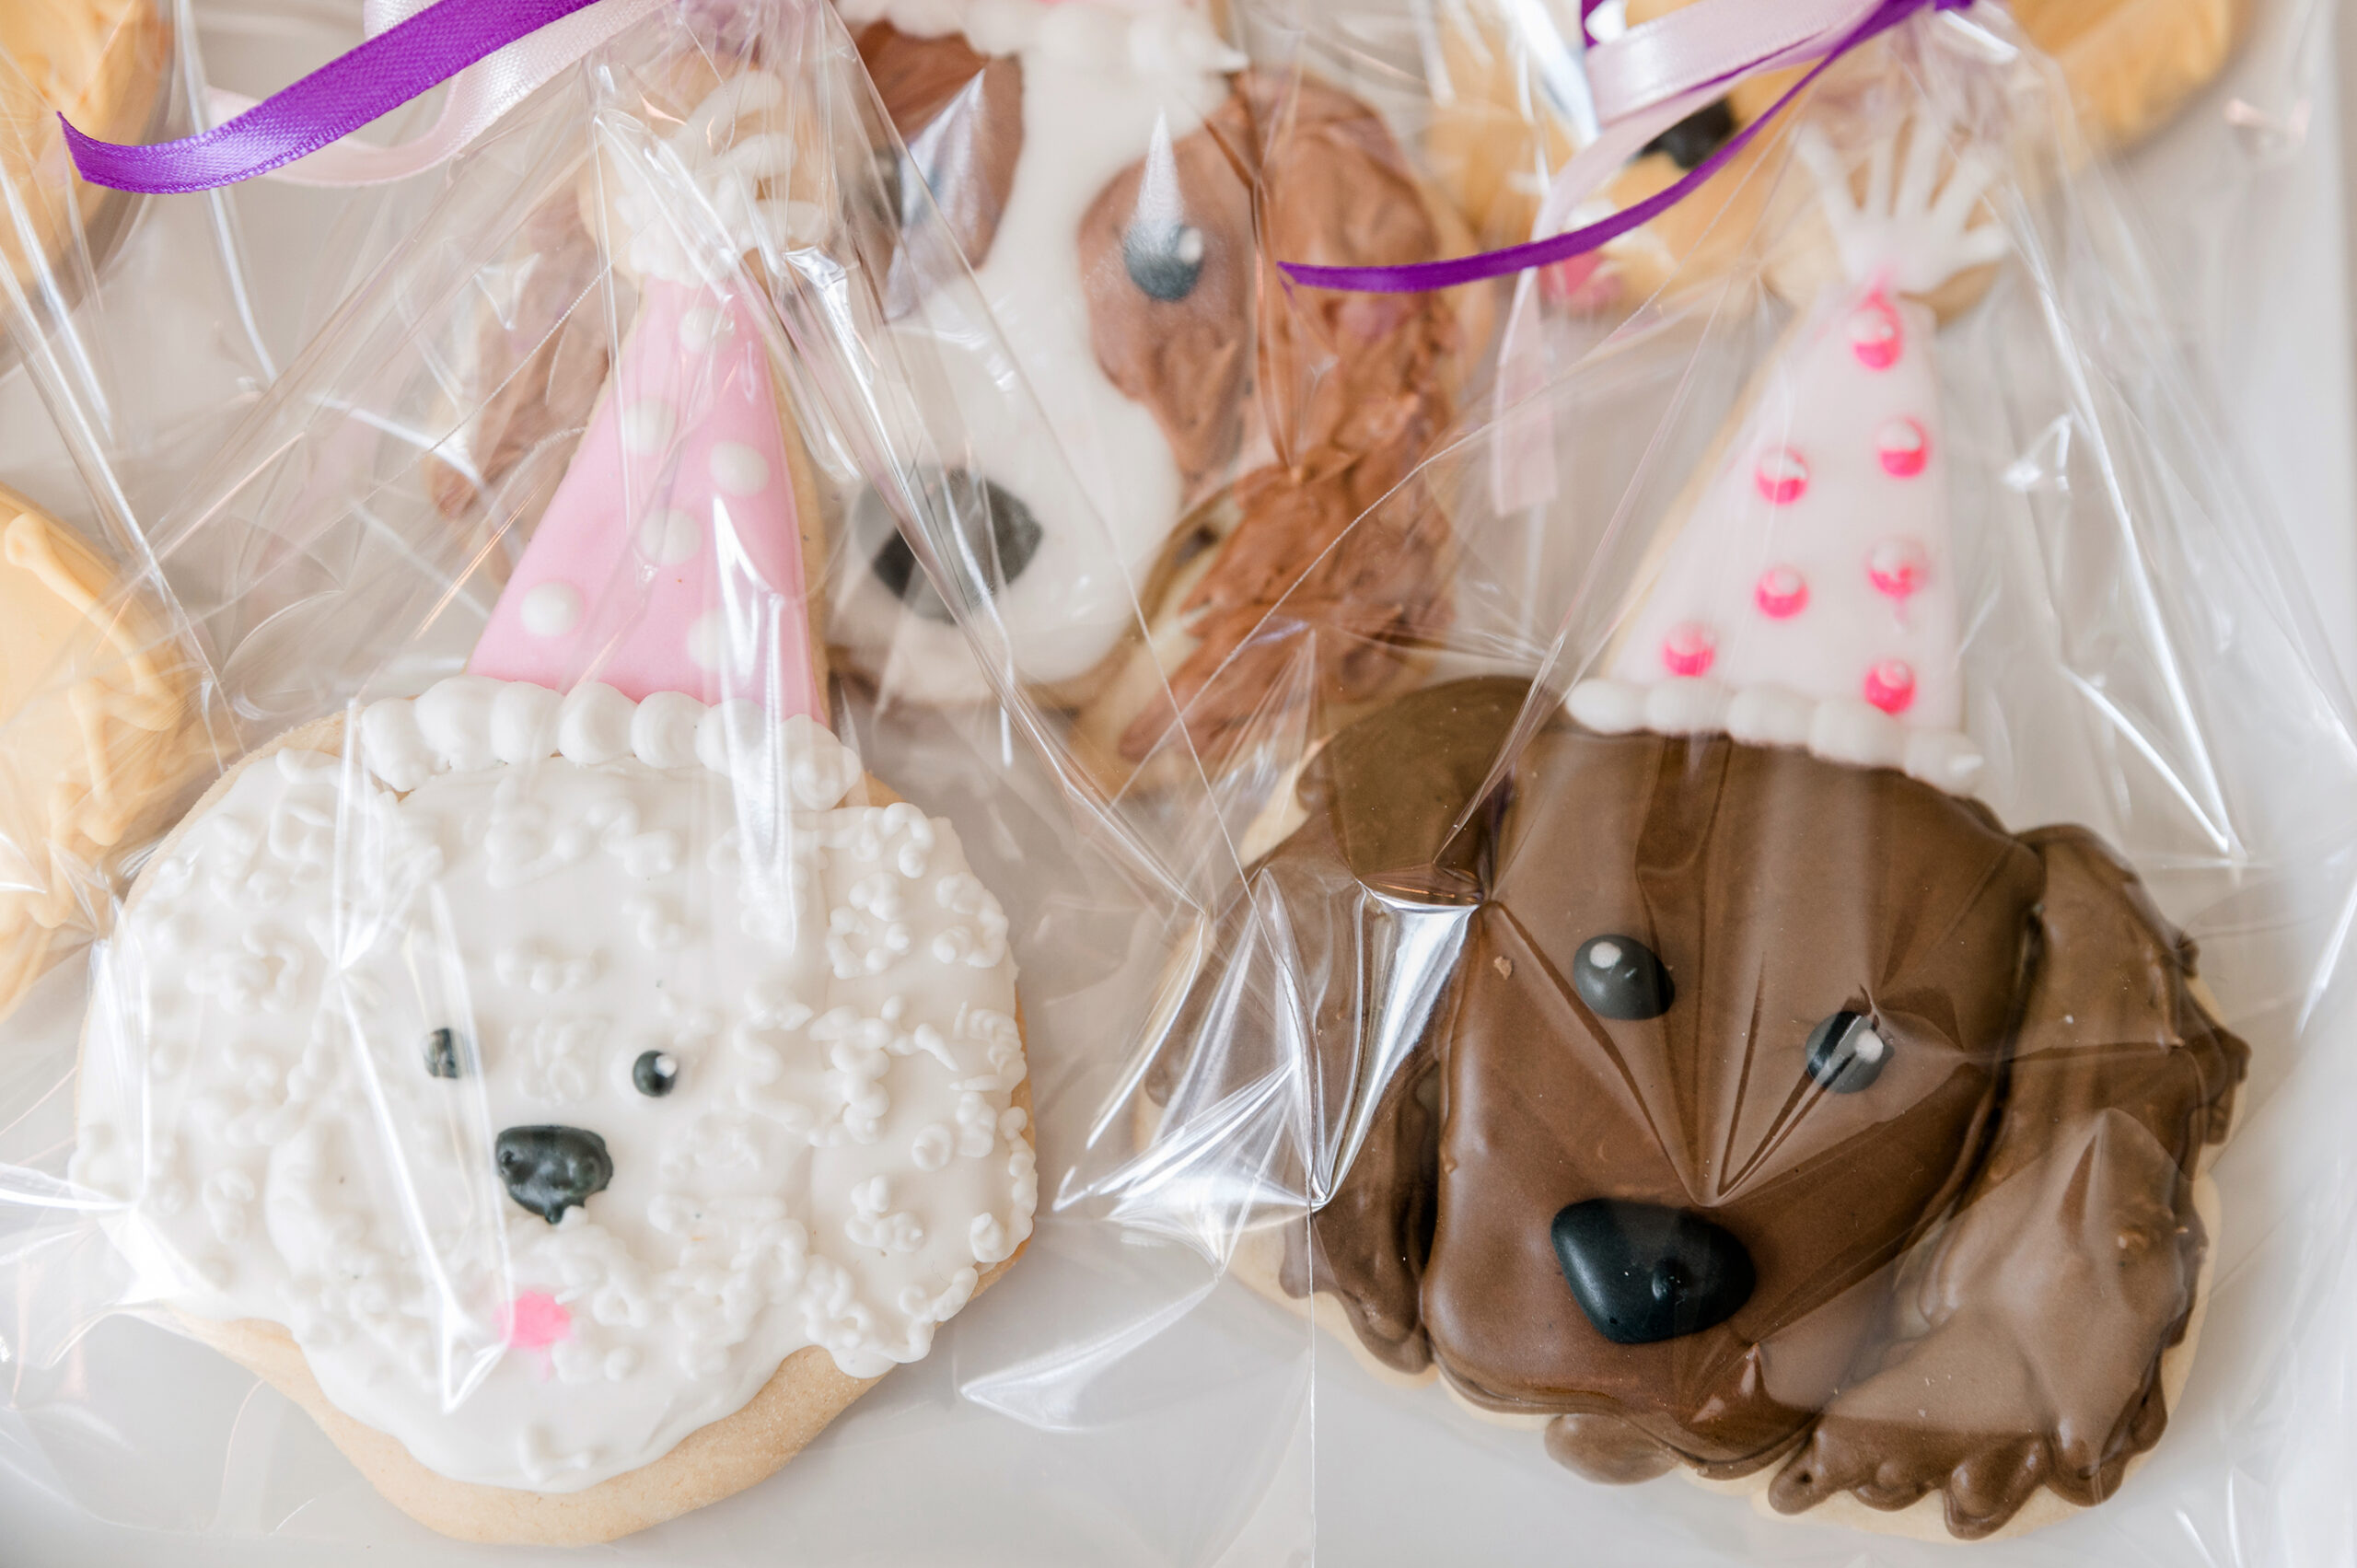 Cookies shaped like puppies from a Dallas toy store.